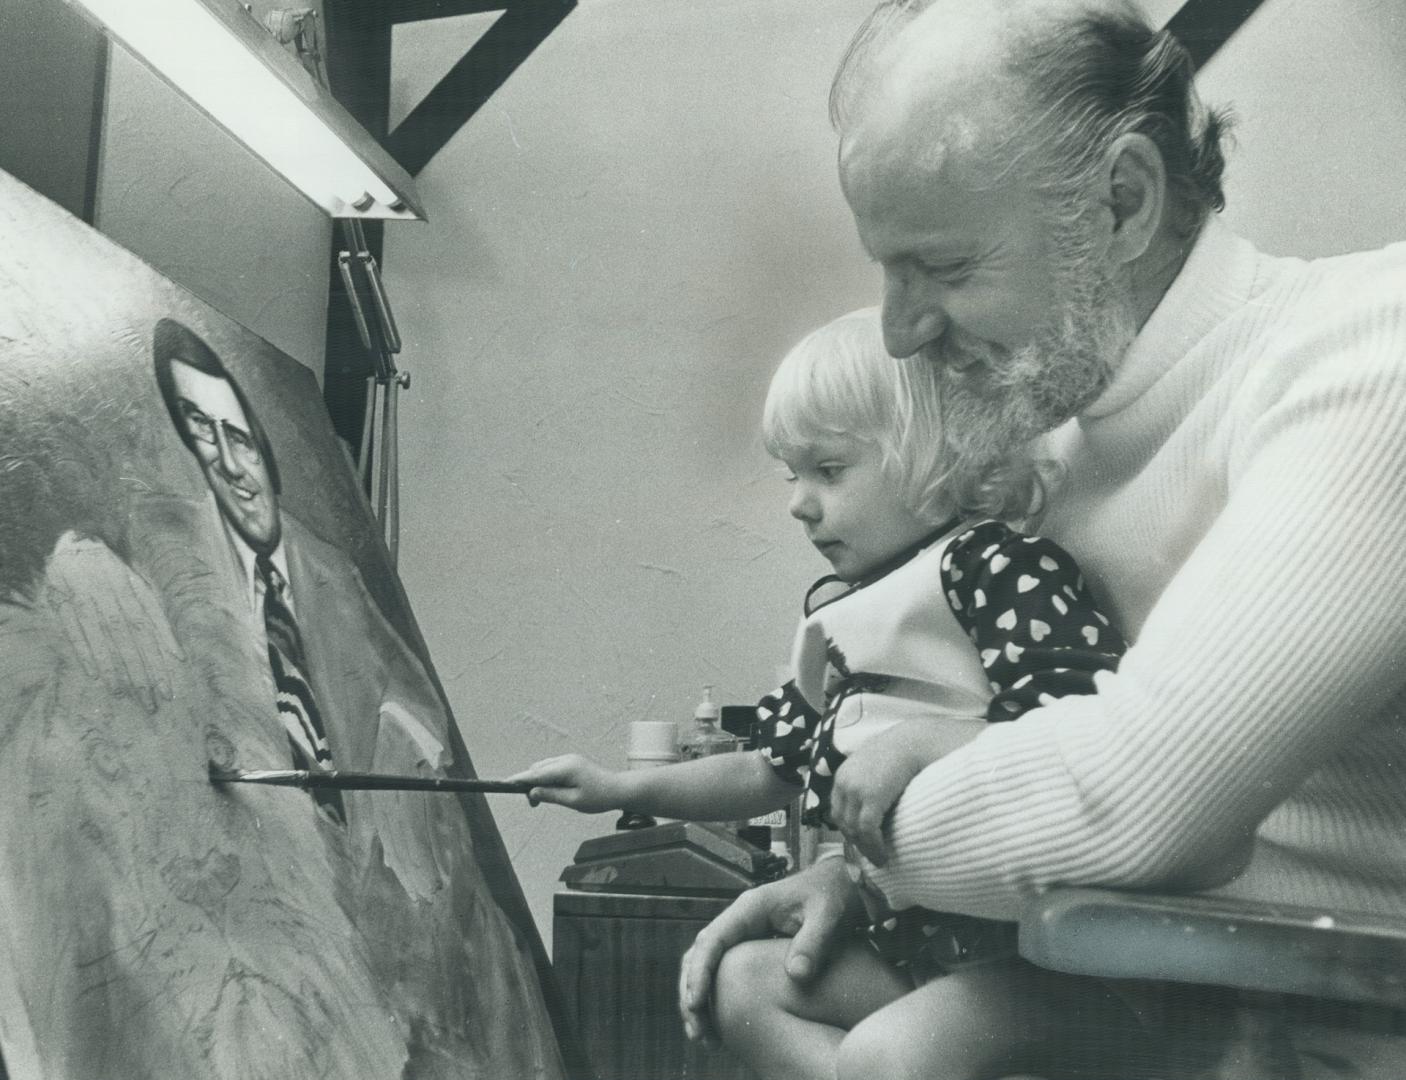 Cara casts professional eye over father's painting